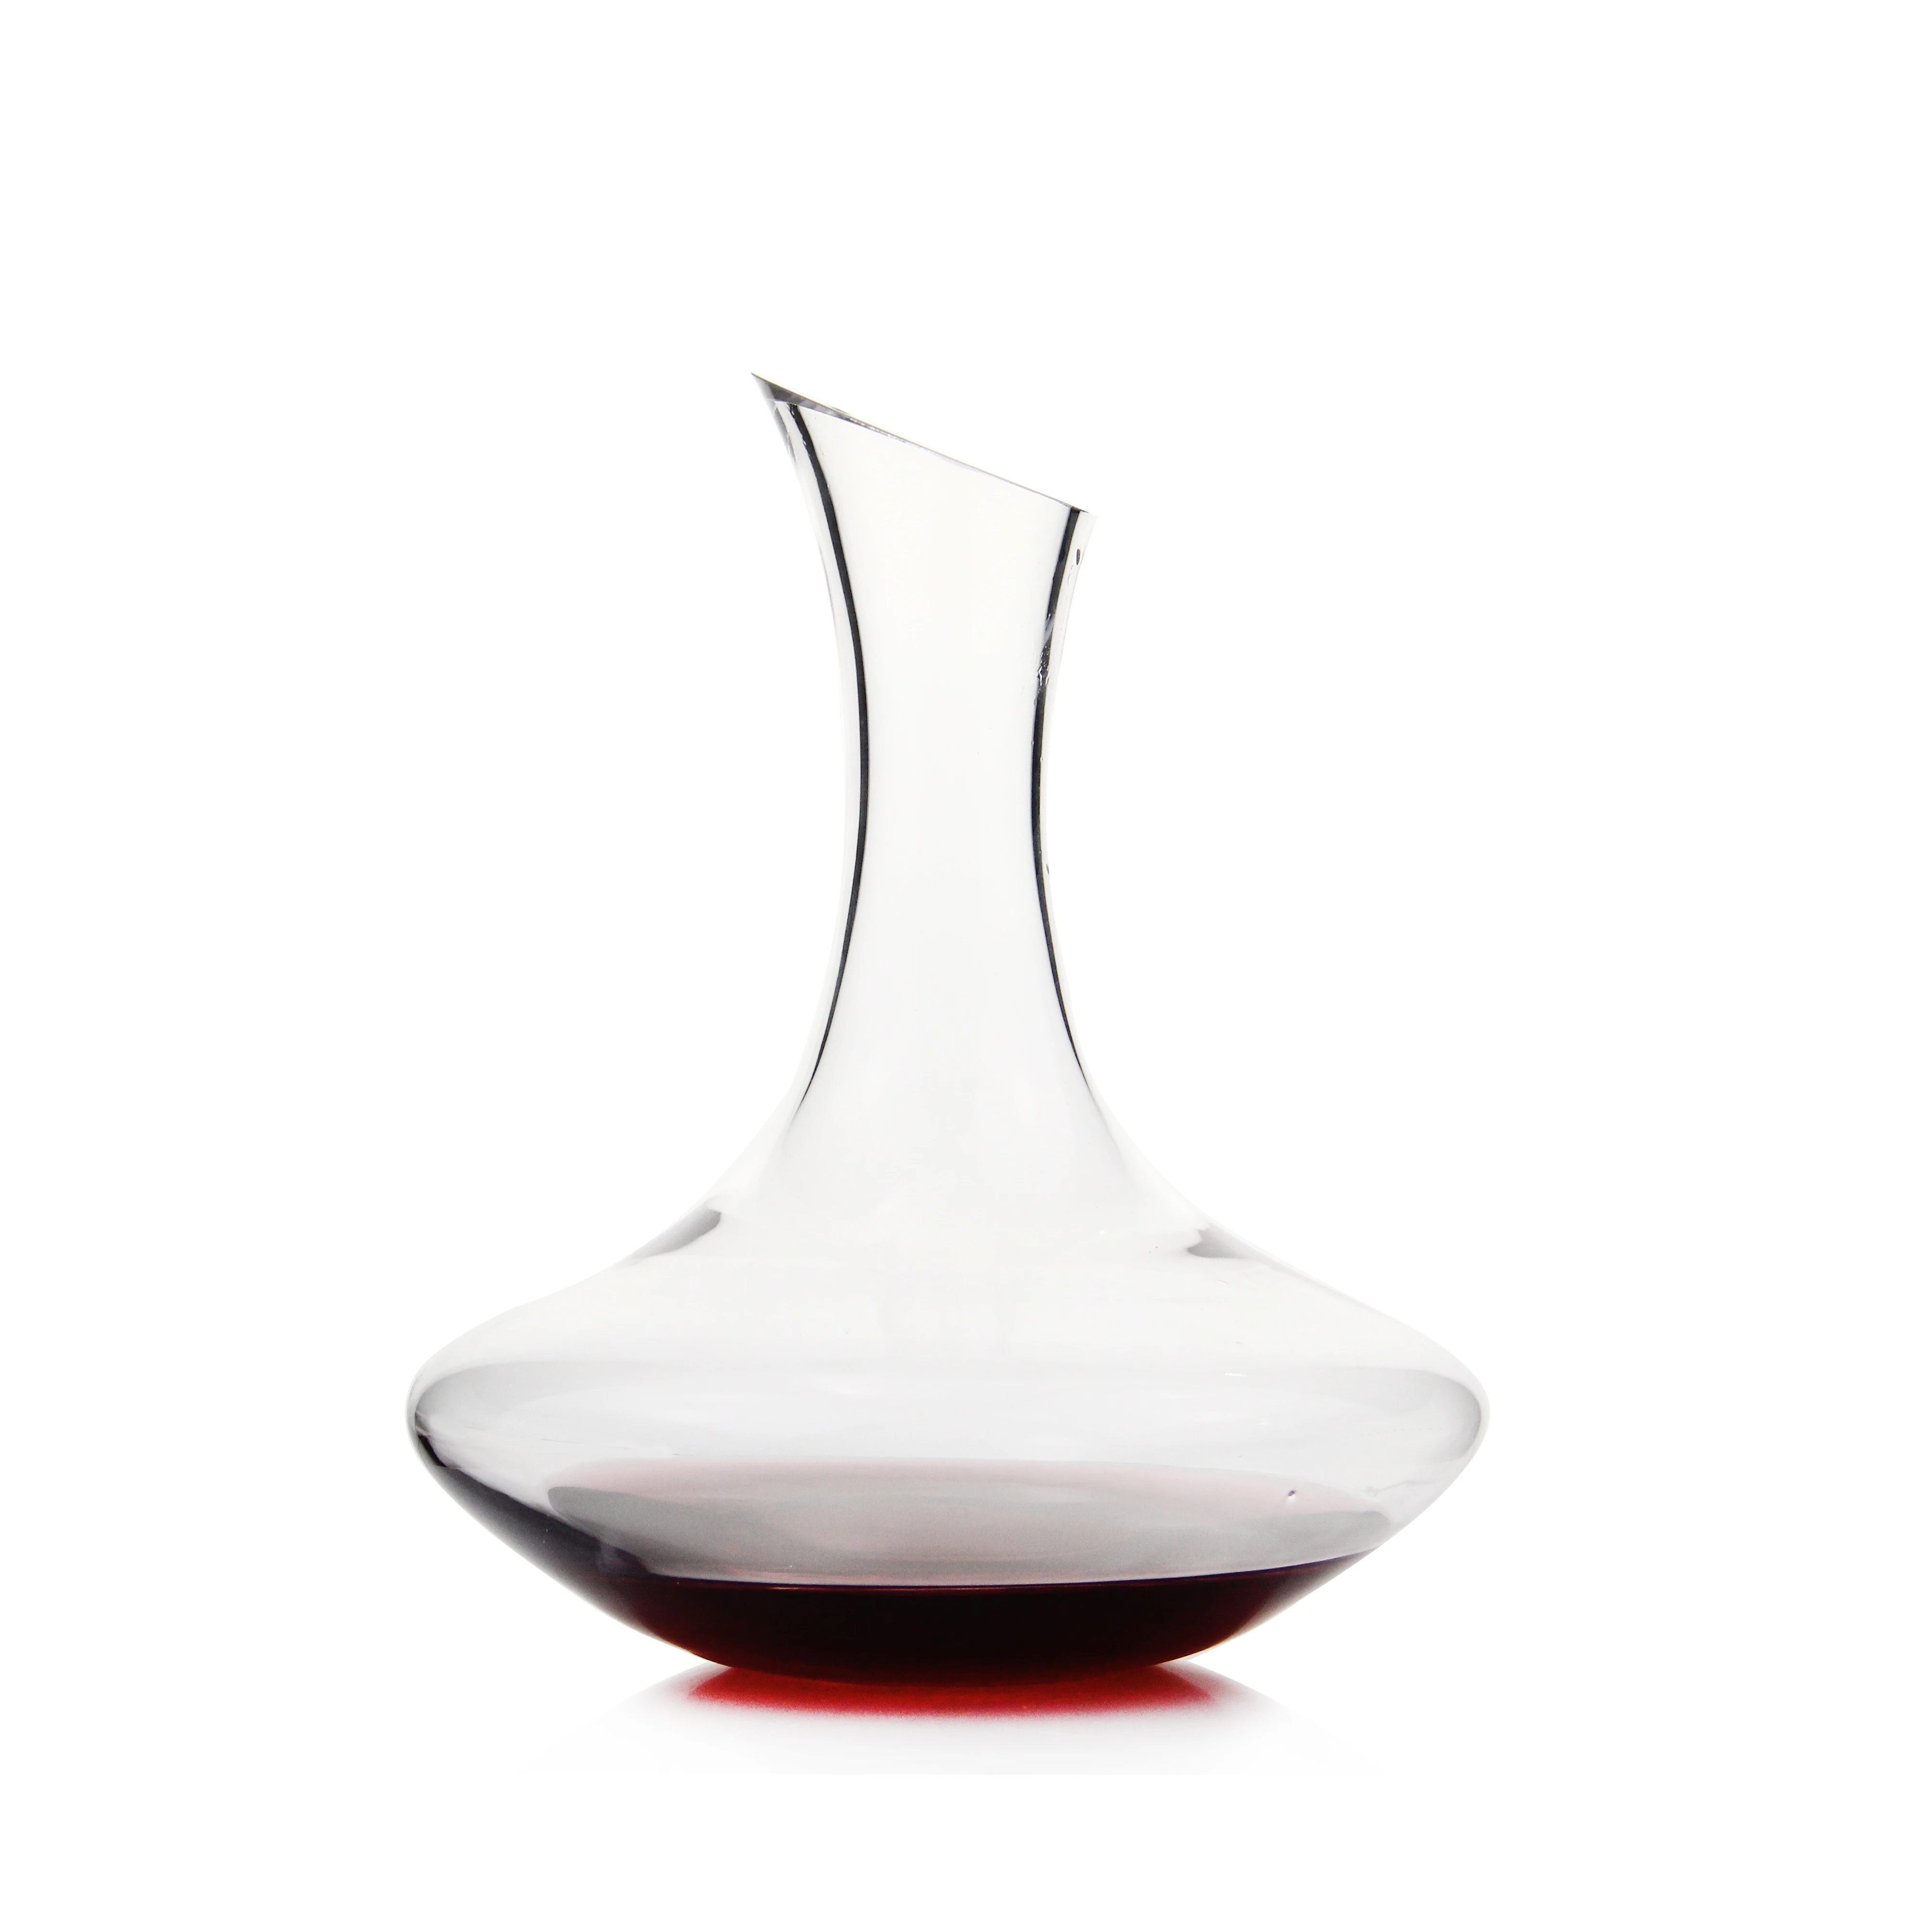 100% Lead-Free Hand Blown Crystal Glass, Red Wine Carafe, Wine Aerator with Wide Base